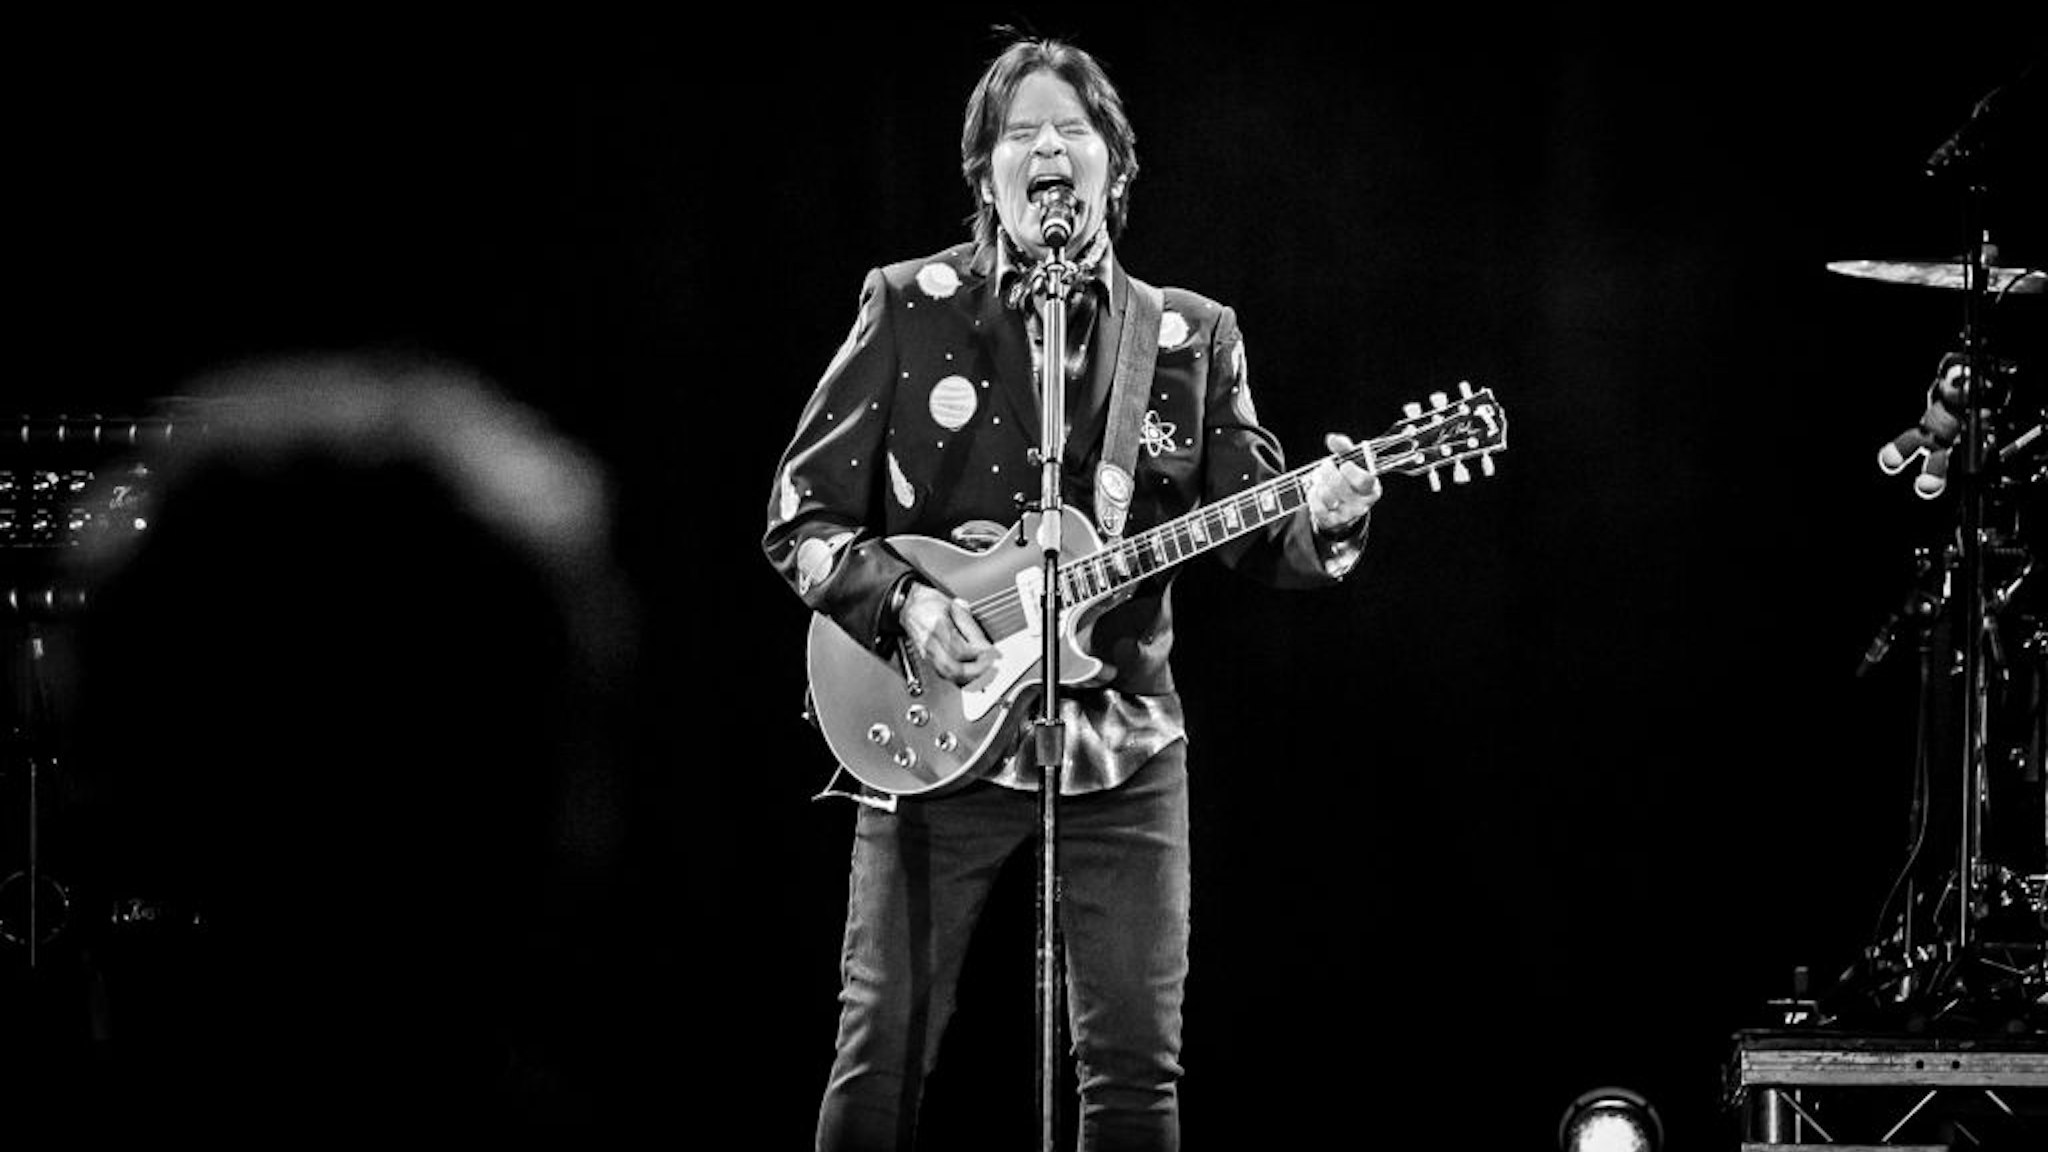 LONDON, UNITED KINGDOM - OCTOBER 25: American musician John Fogerty performing live on stage during Bluesfest at the O2 Arena in London, on October 25, 2018. (Photo by Alison Clarke/Future Publishing via Getty Images)